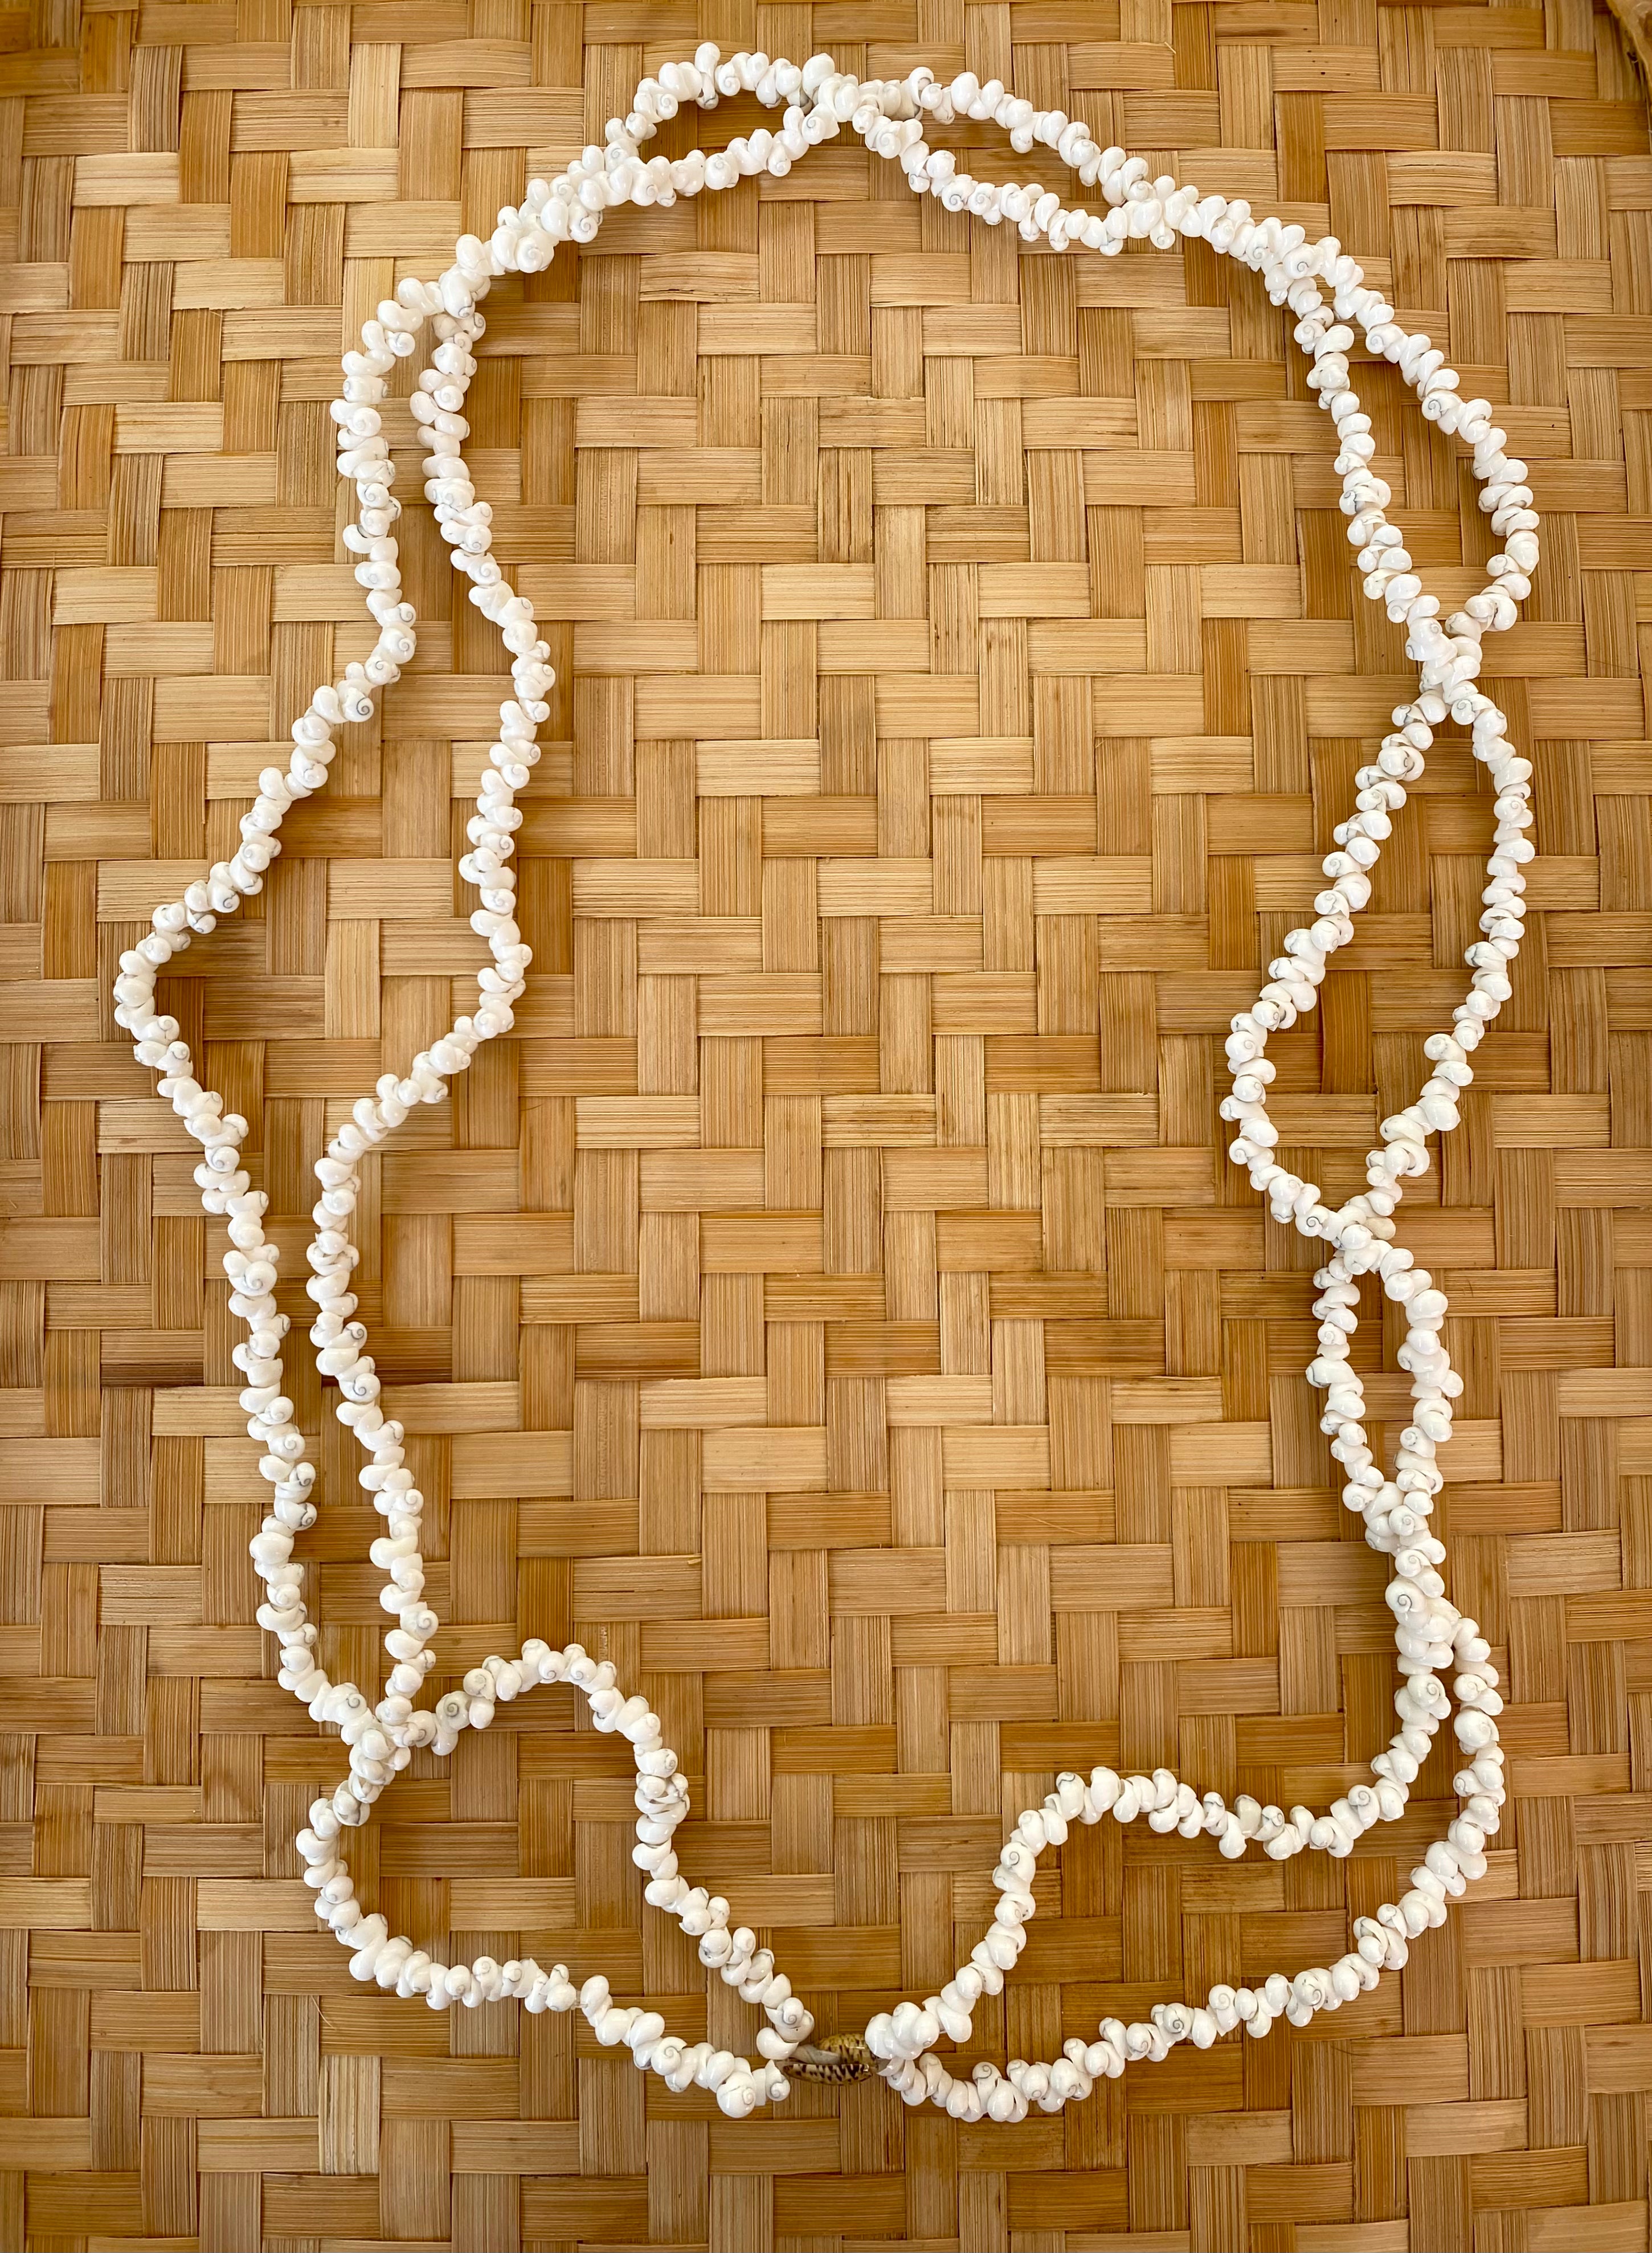 Bubble Shell + Cowrie Lei necklace